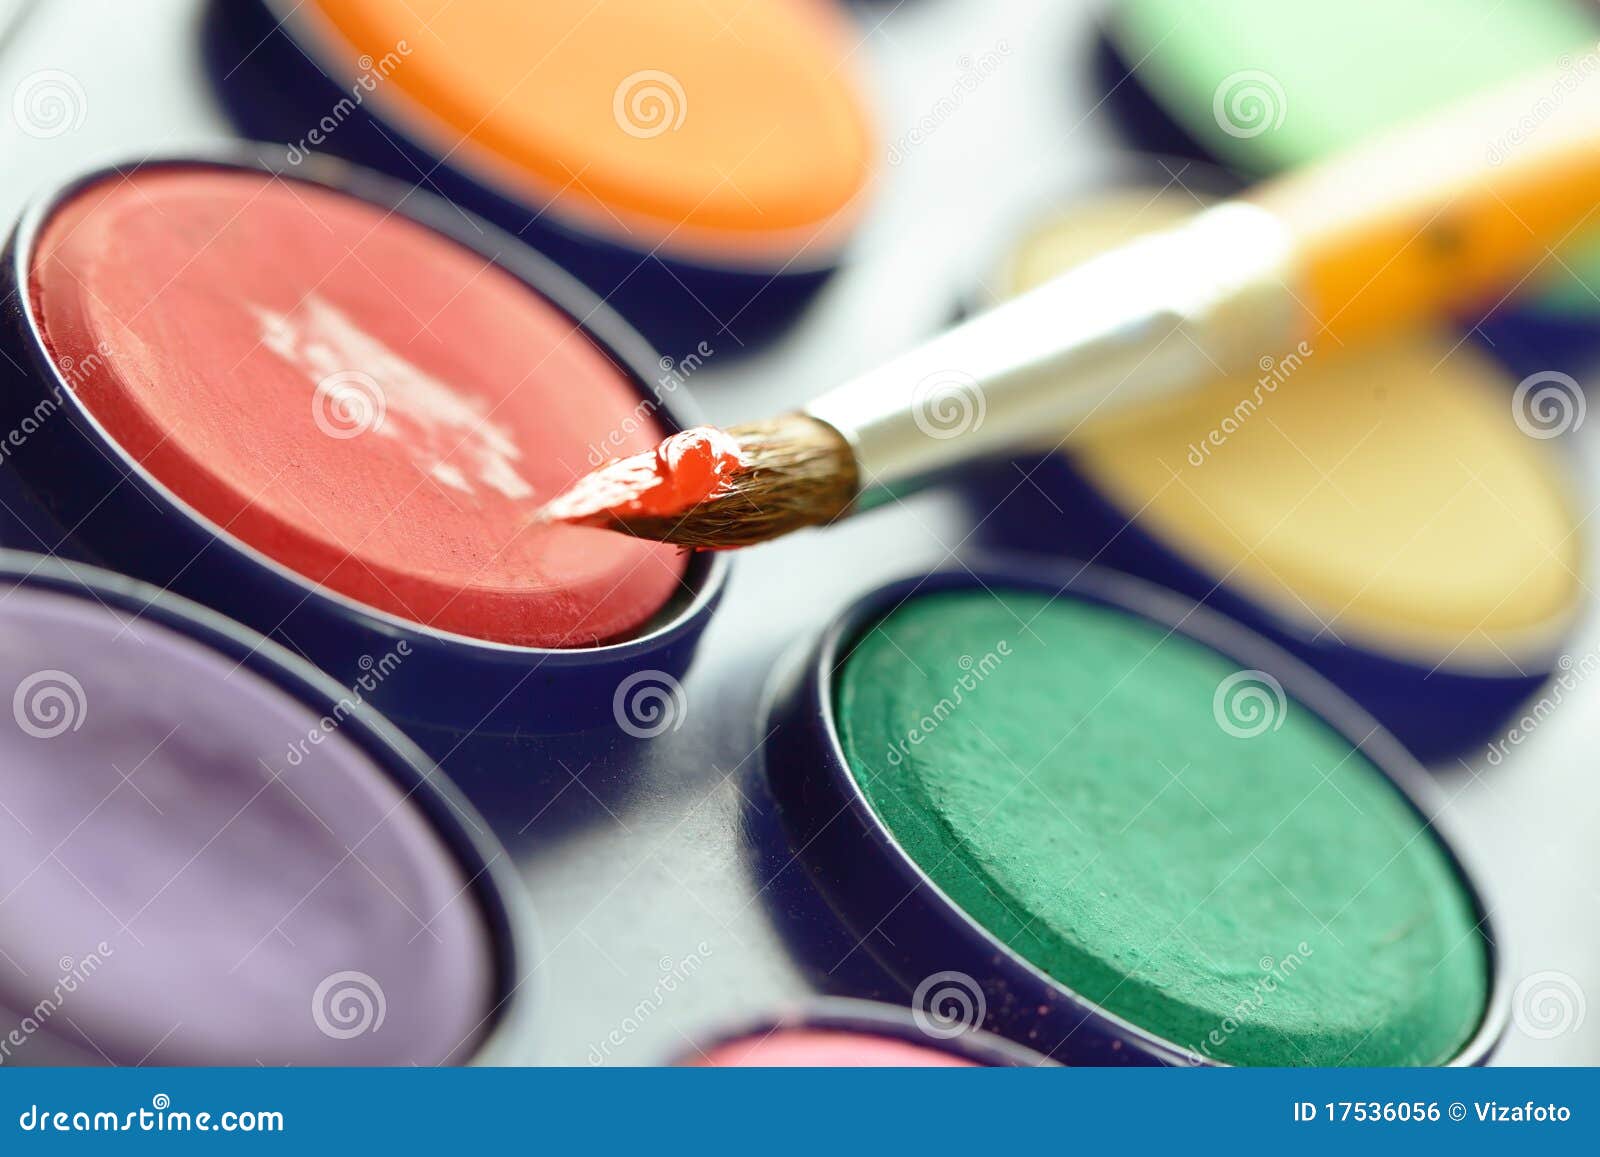 Watercolor paints stock photo. Image of craft, stains - 17536056